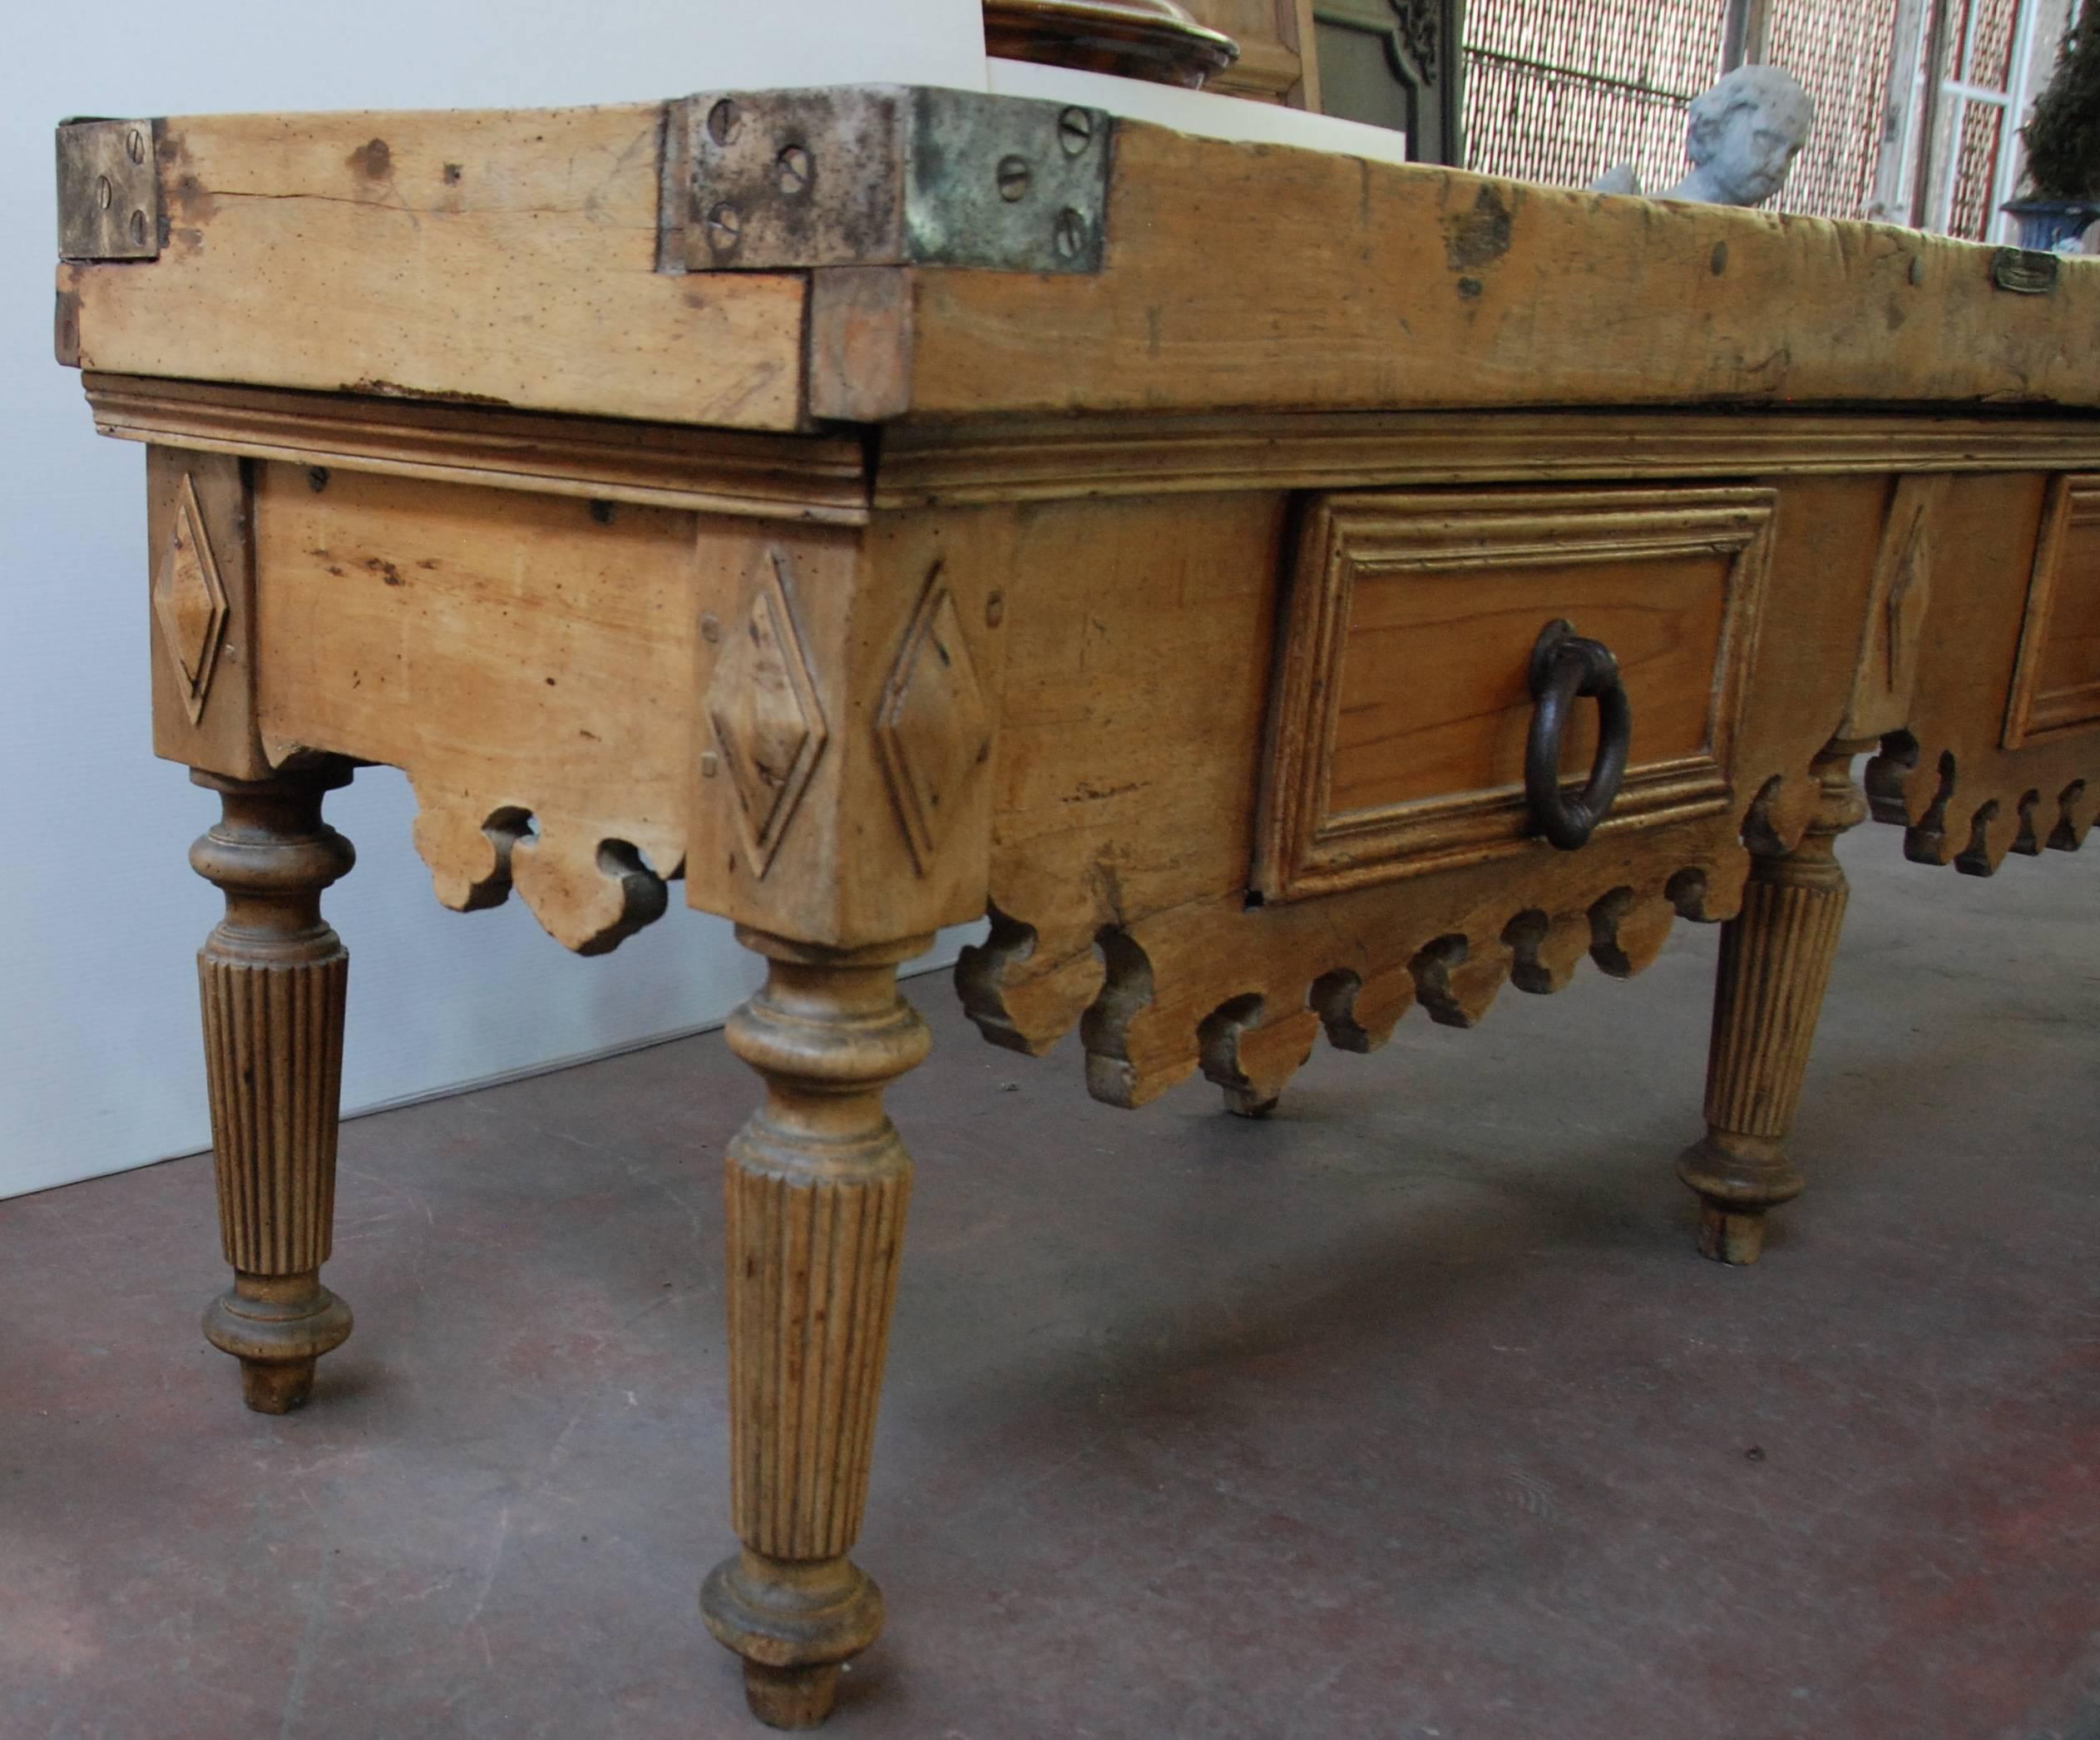 Beautiful 19th century Vergne & Cie butcher block from Paris, France. Carved scalloped apron over two large drawers and six fluted legs. Beautiful white marble top, made later, included. 